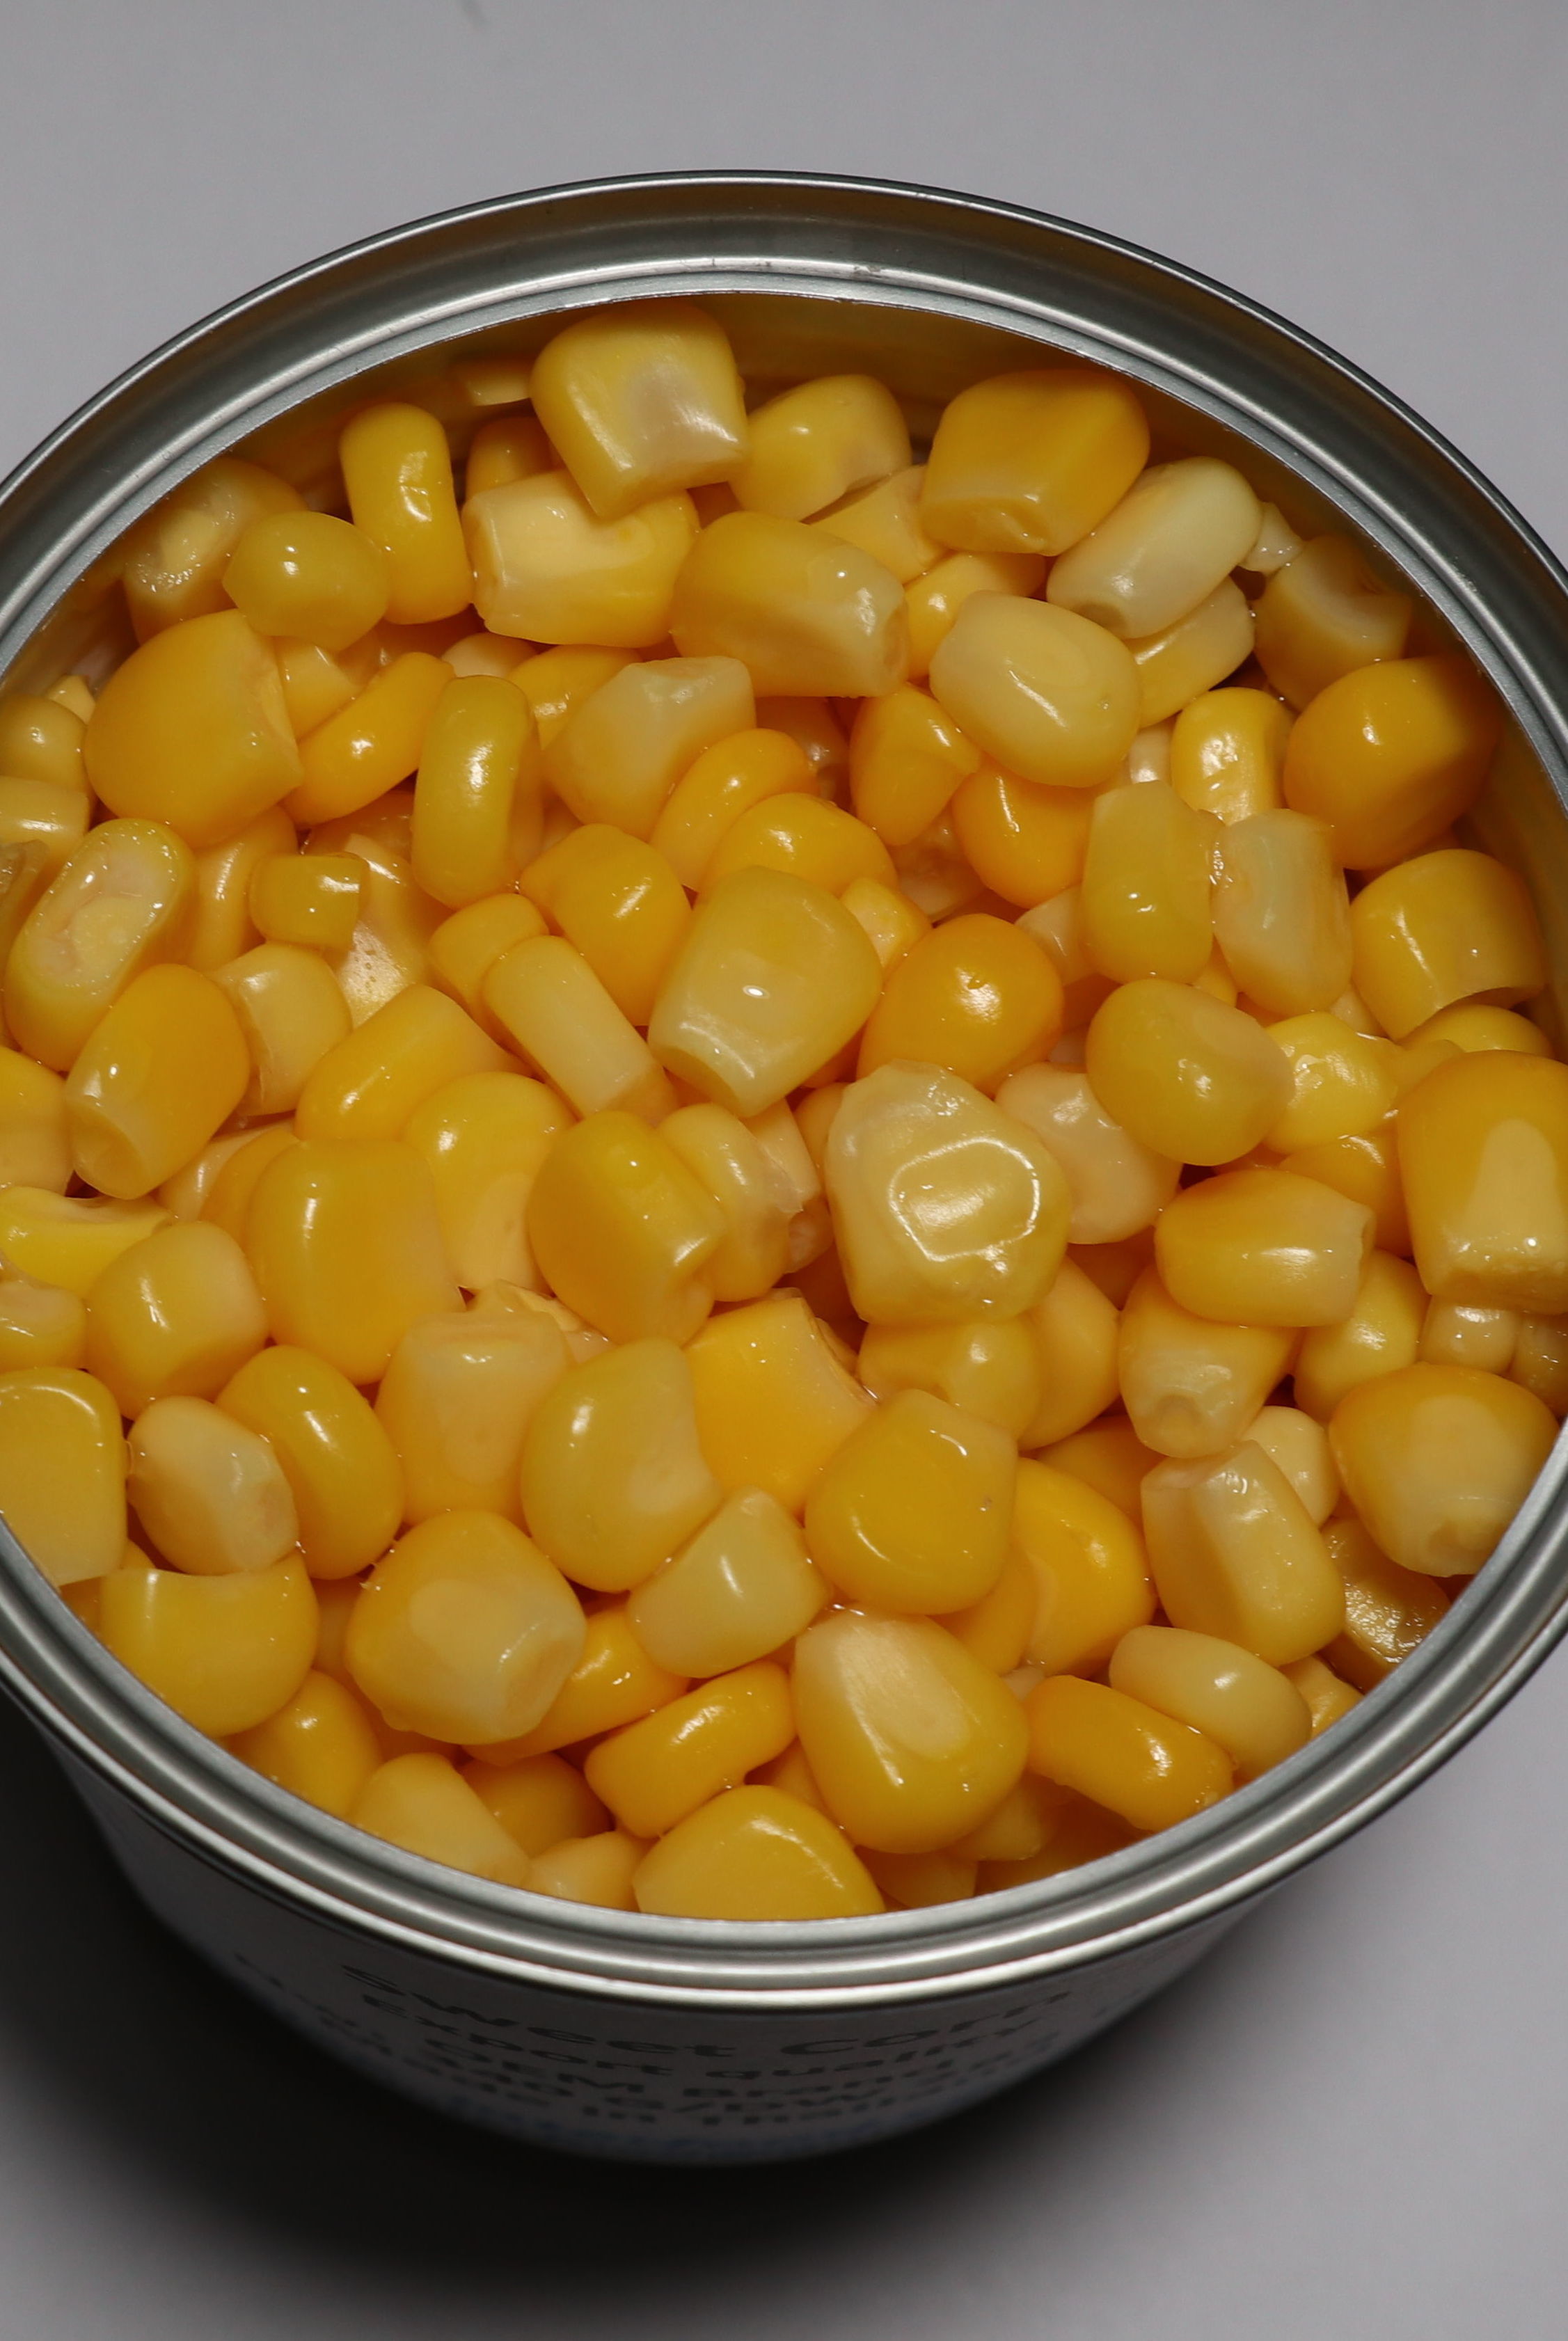 thailand corn canned exporting best quality we can offer our perfect and professional service to our customers at valuable prices under our own brand or Customers/private label to our customers in Eur